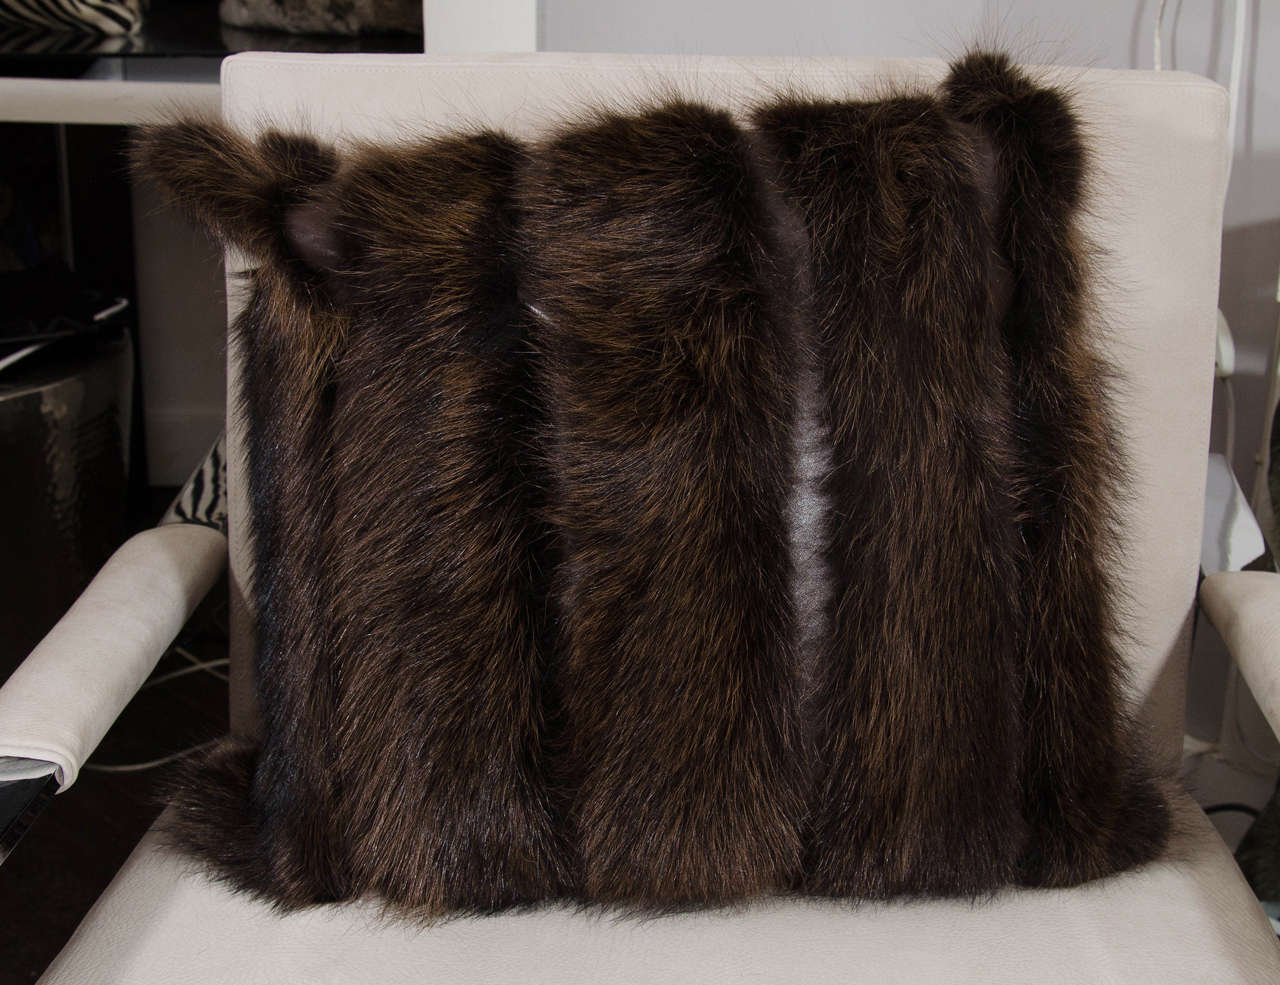 Brown fox pillow with leather stripes.